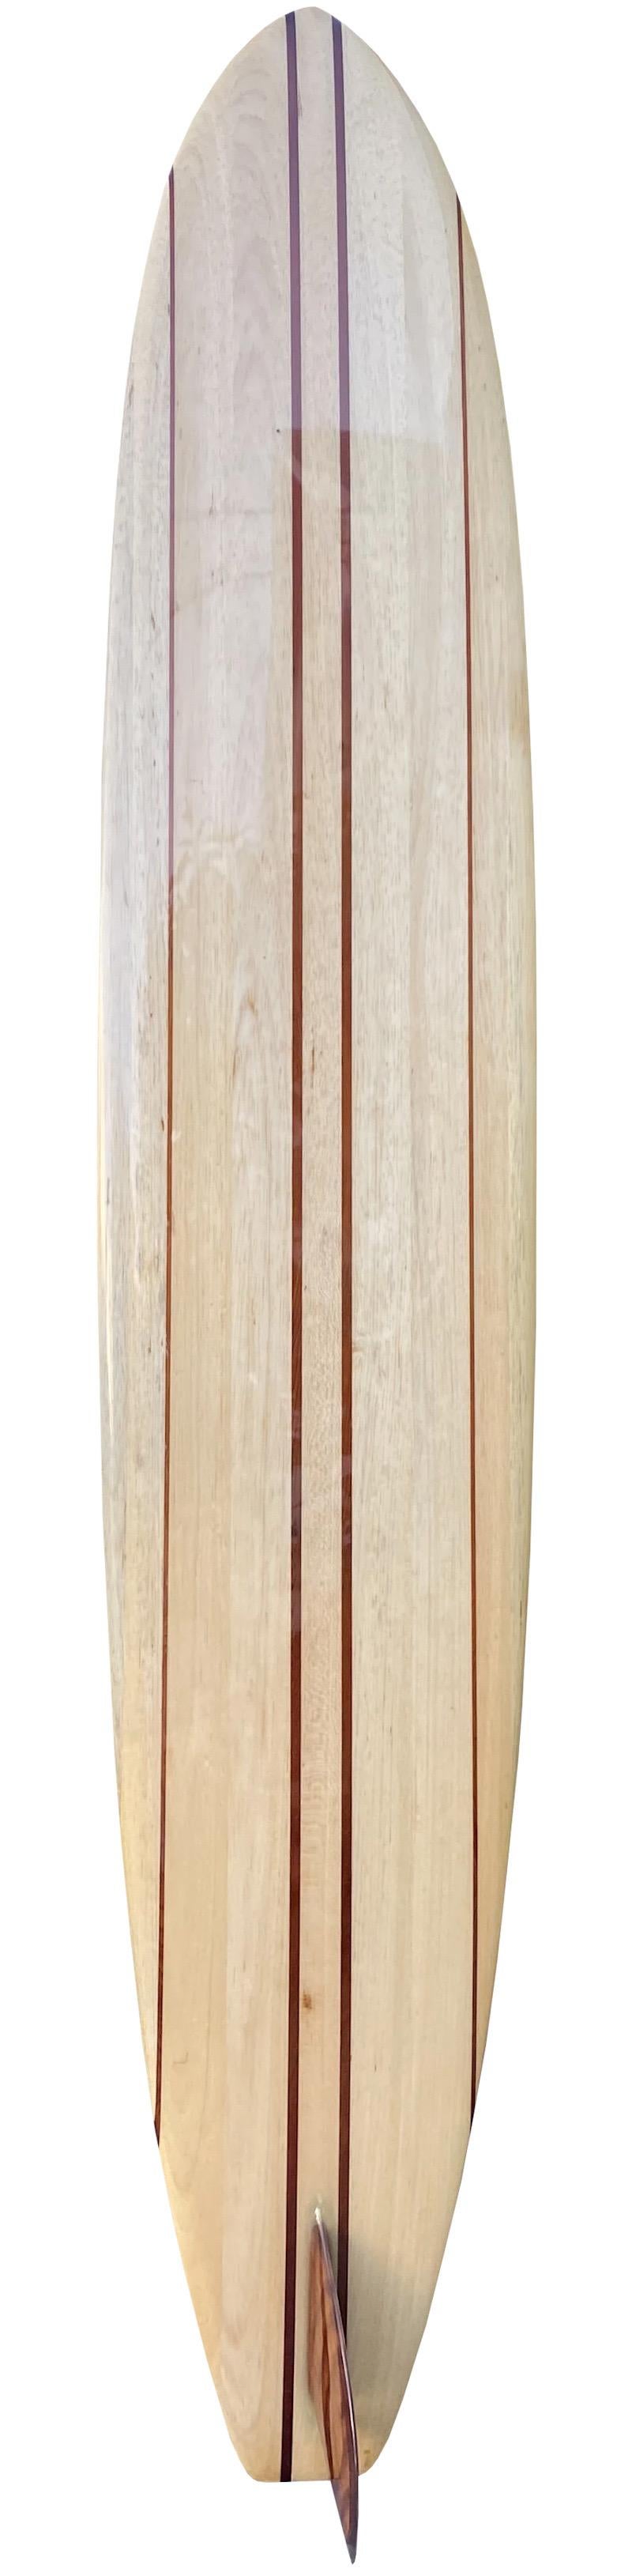 1995 Phil Edwards shaped balsawood longboard. Features a Classic 60s longboard design with 4-stringers of redwood and stunning redwood fin. Rare black/white logo of arguably one of the most iconic surfing photographs of the 1990s showing Phil